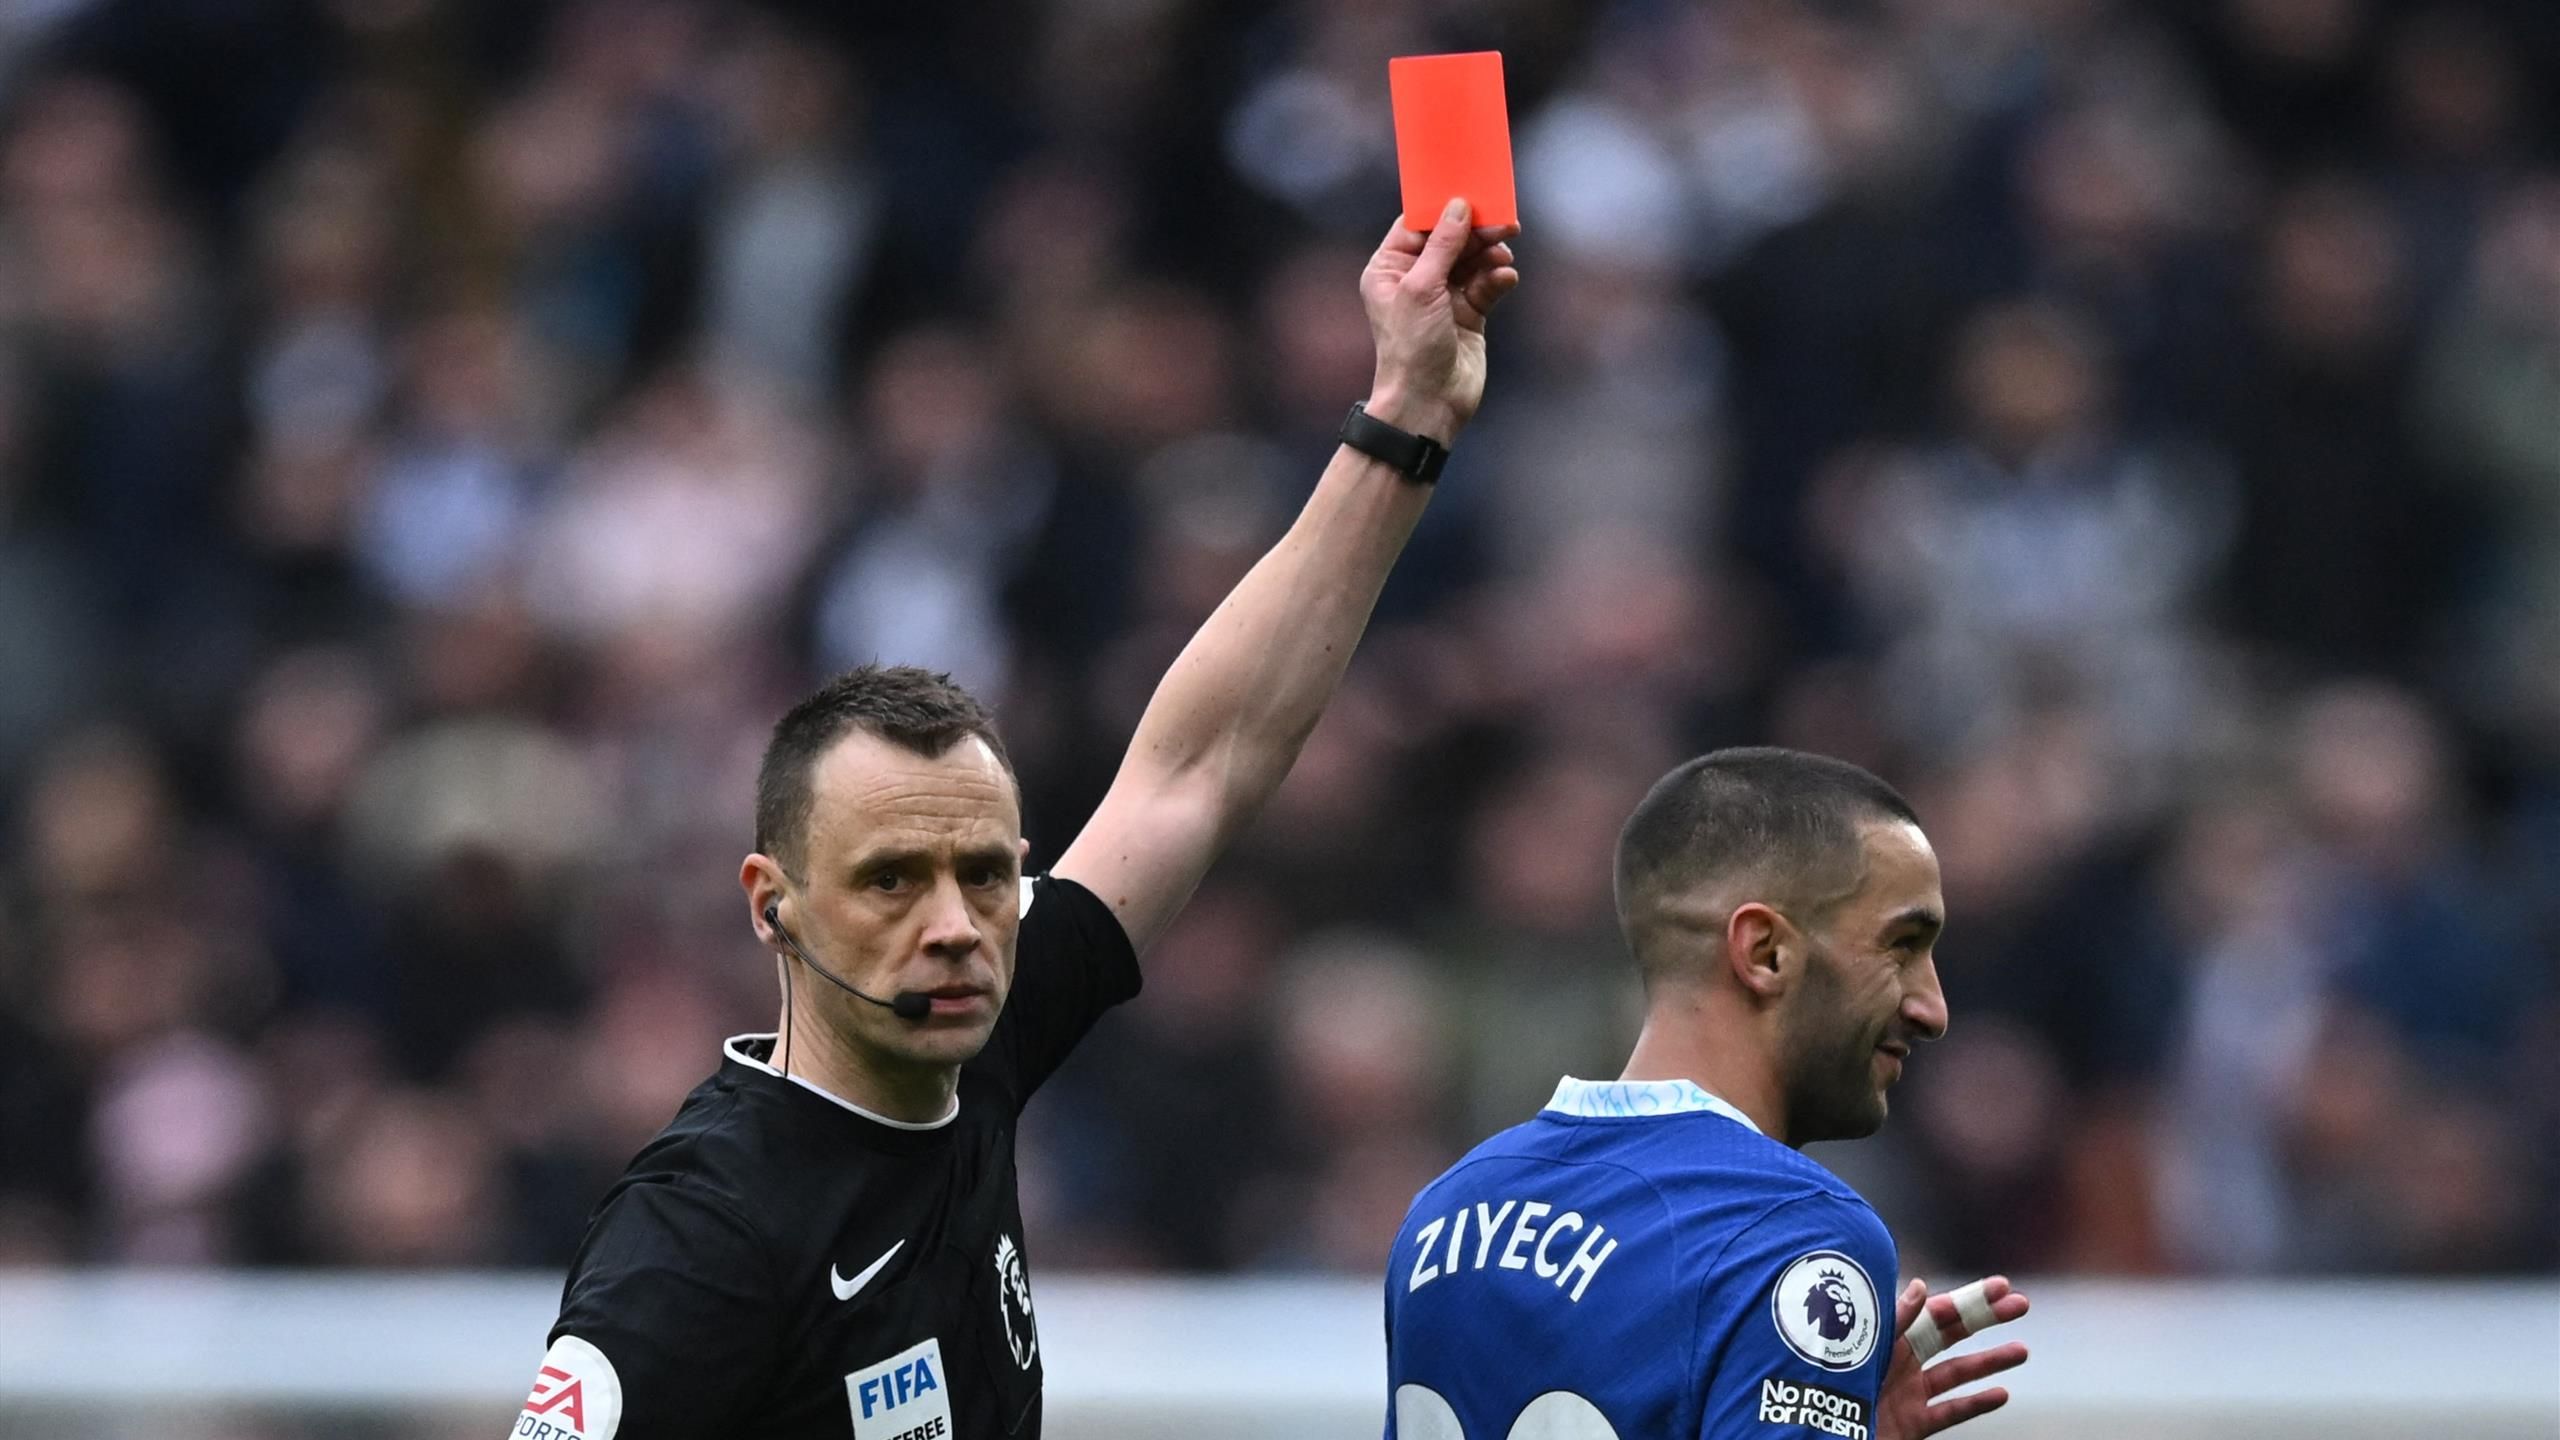 Furious football referee showing a red card Stock Photo